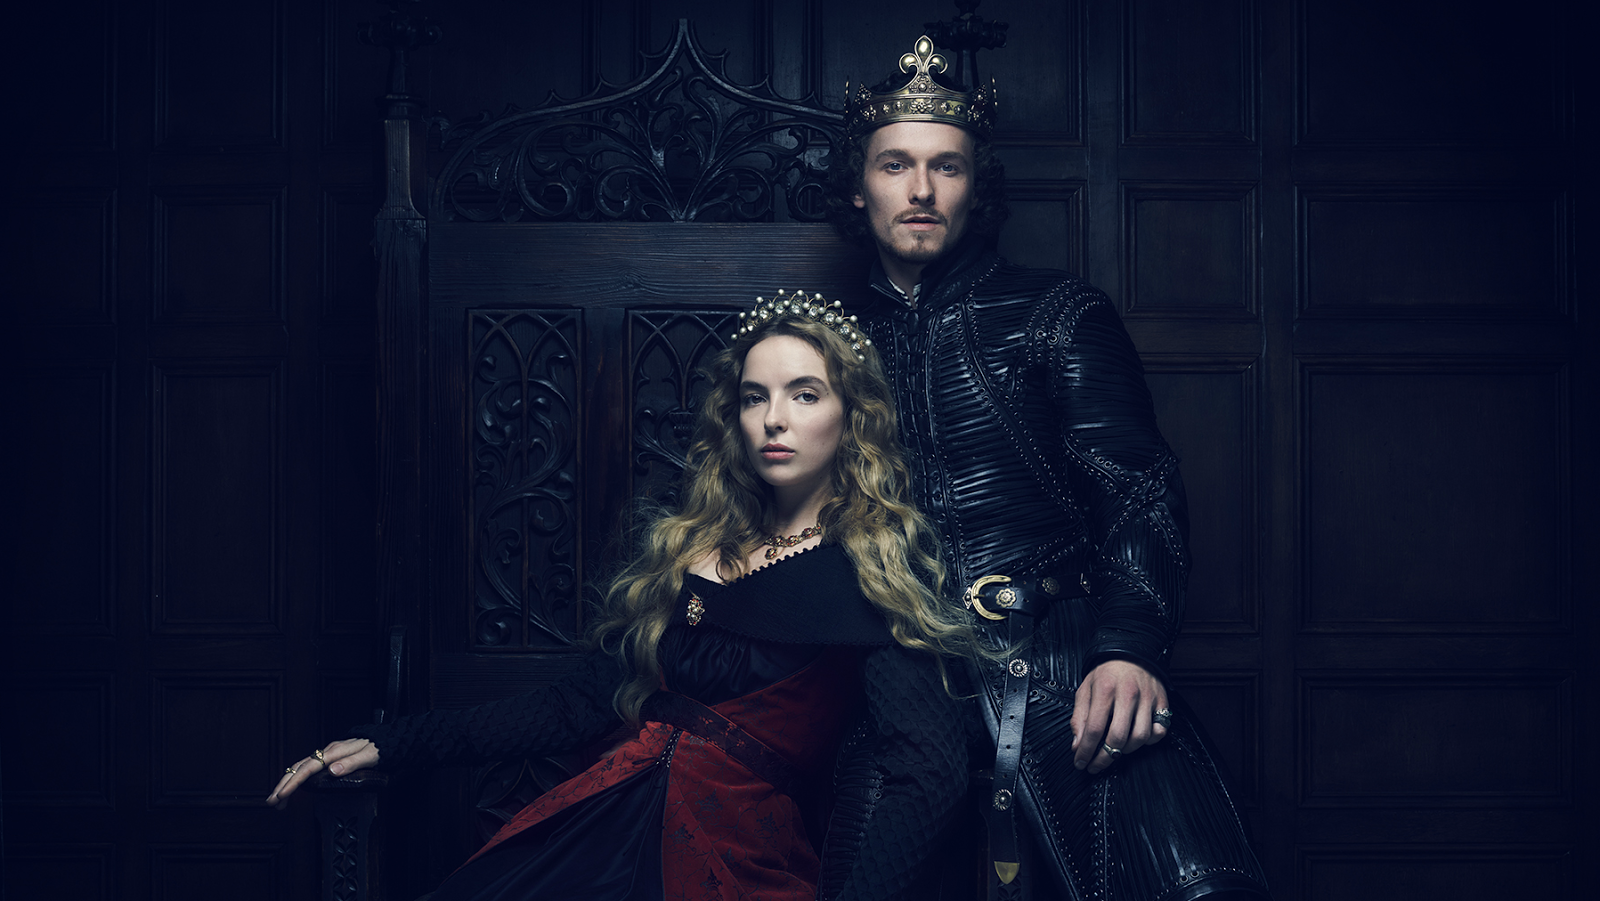 Stars of The White Princess, Jodie Comer, and Jacob Collins-Levy were snubbed by the 2017 Emmy nominations